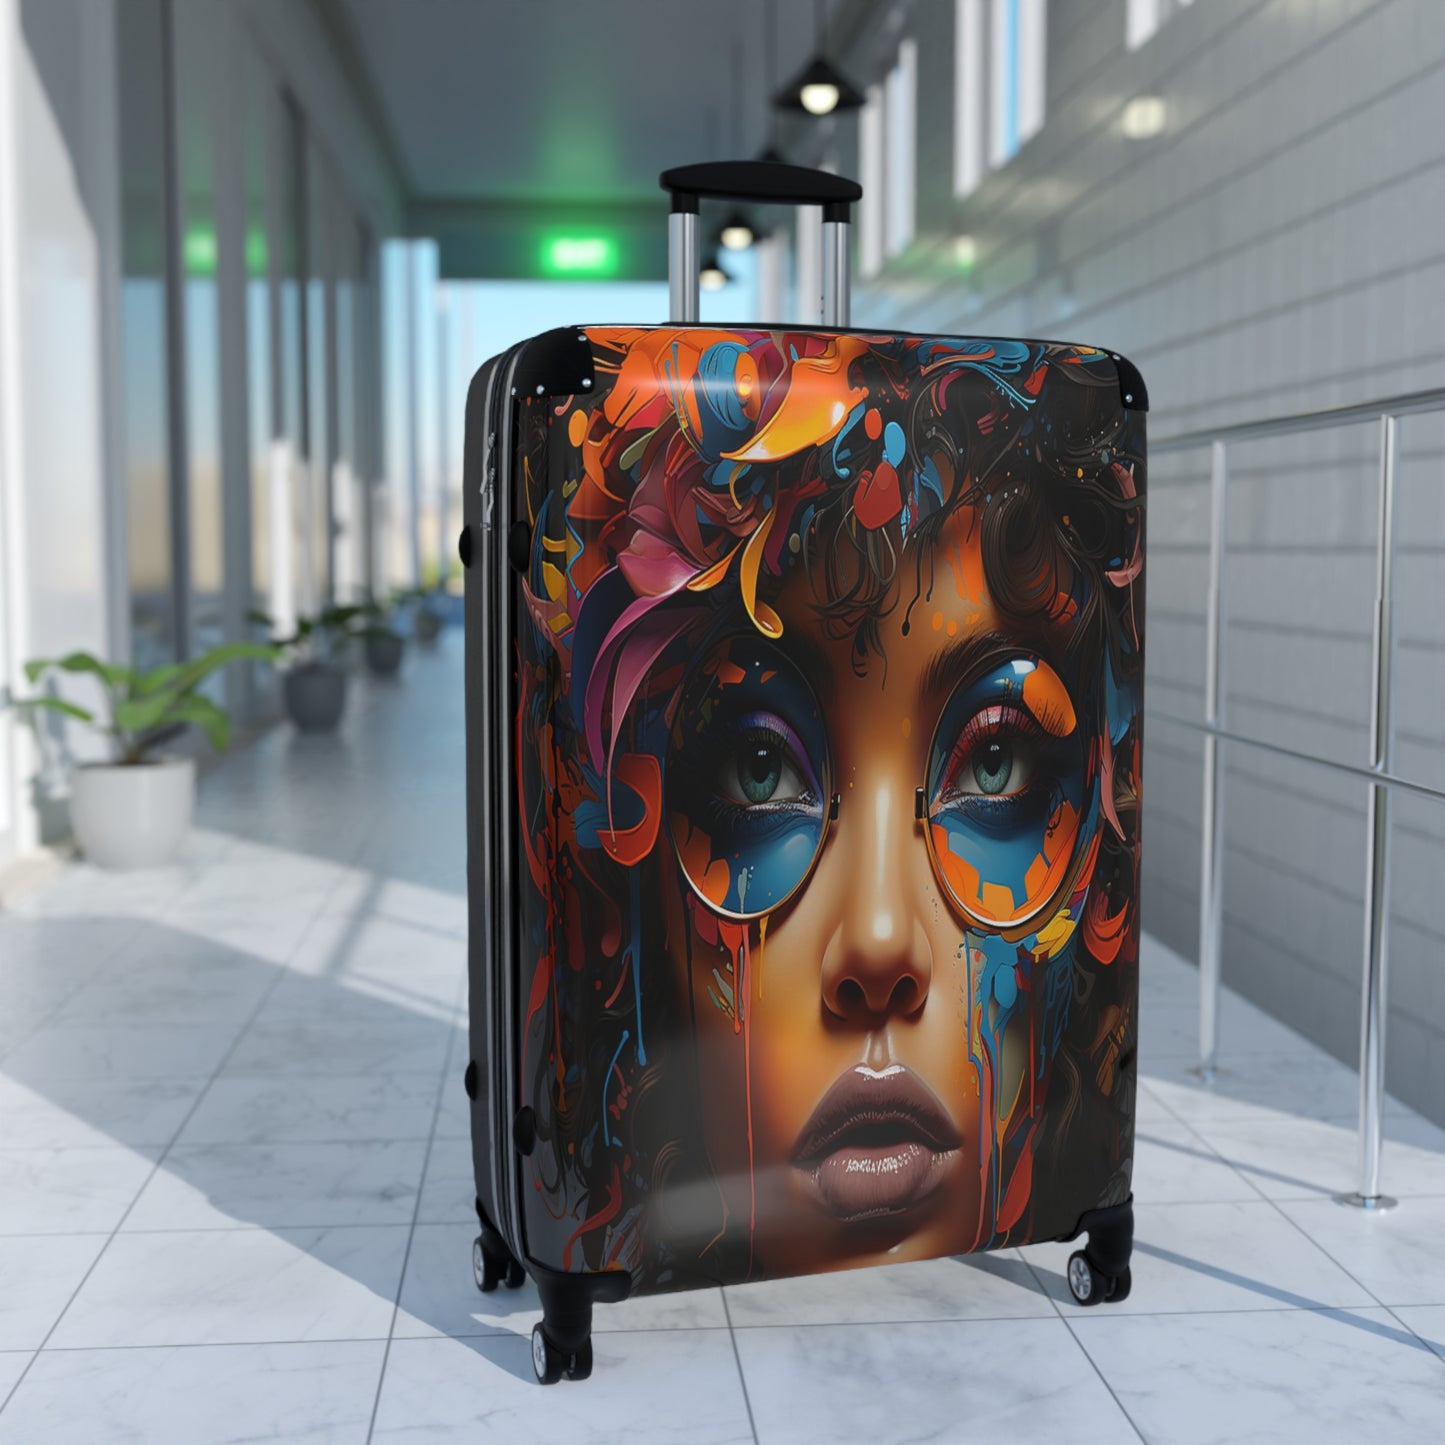 Artistic Odyssey Luggage | Hippie Trip Collection | Christmas vacation | Travel Luggage | Suitcase | Boho | Retro